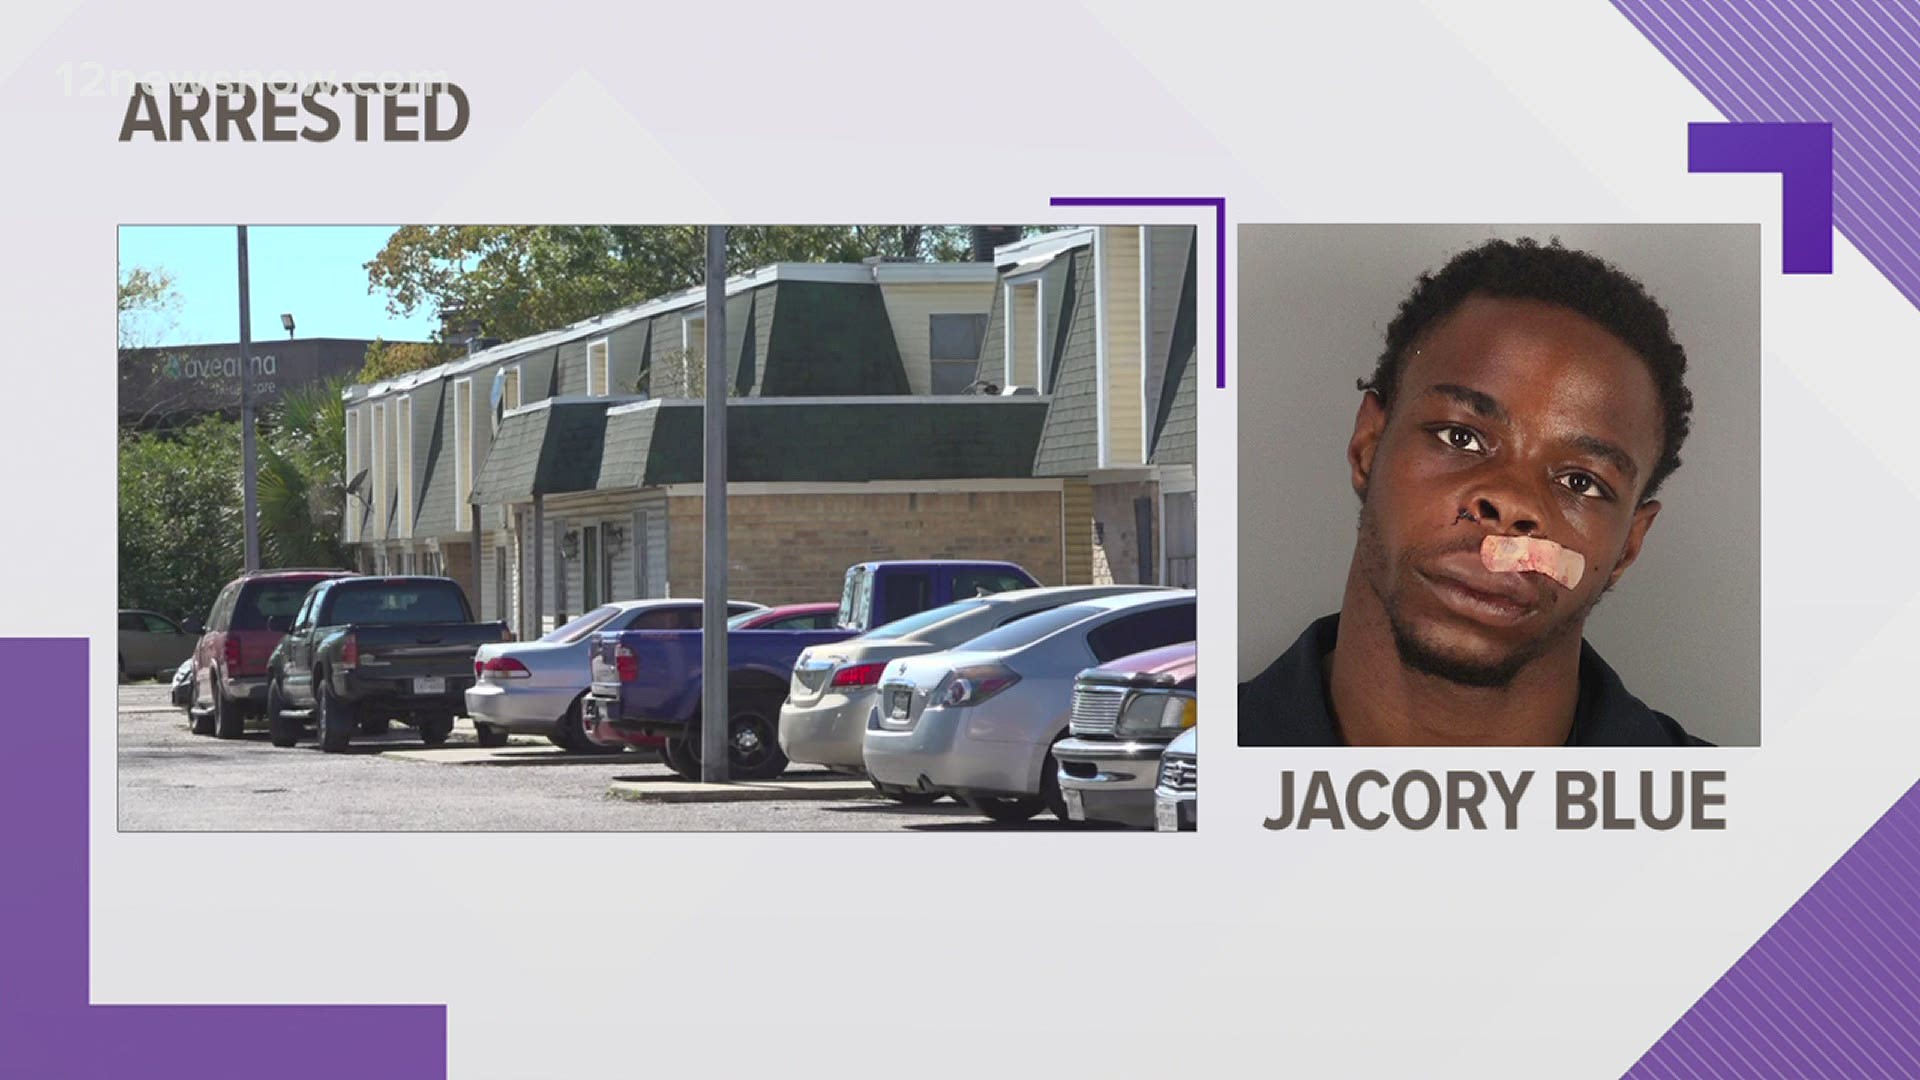 Beaumont Police are looking for more suspects after two armed robberies near the Timberlake Courts Apartments overnight Monday. Jacory Blue has been arrested